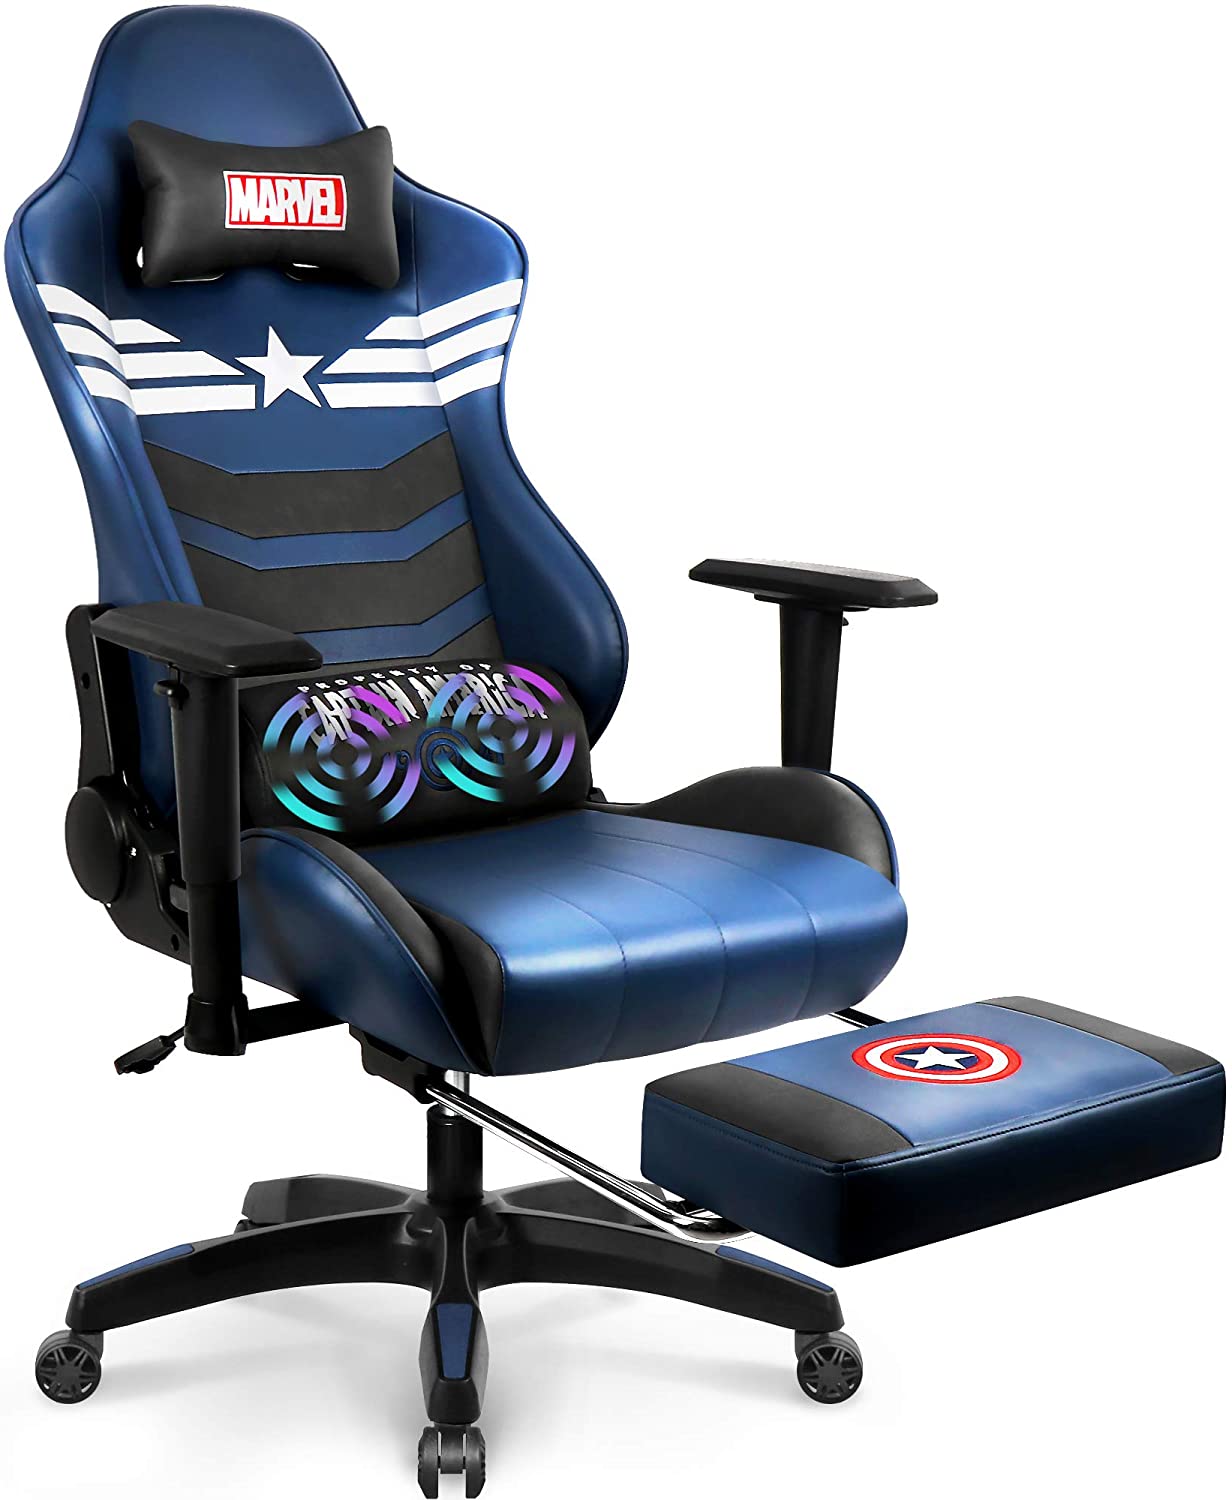 The Best Marvel Gifts For Movie Fans and Comic Book Lovers